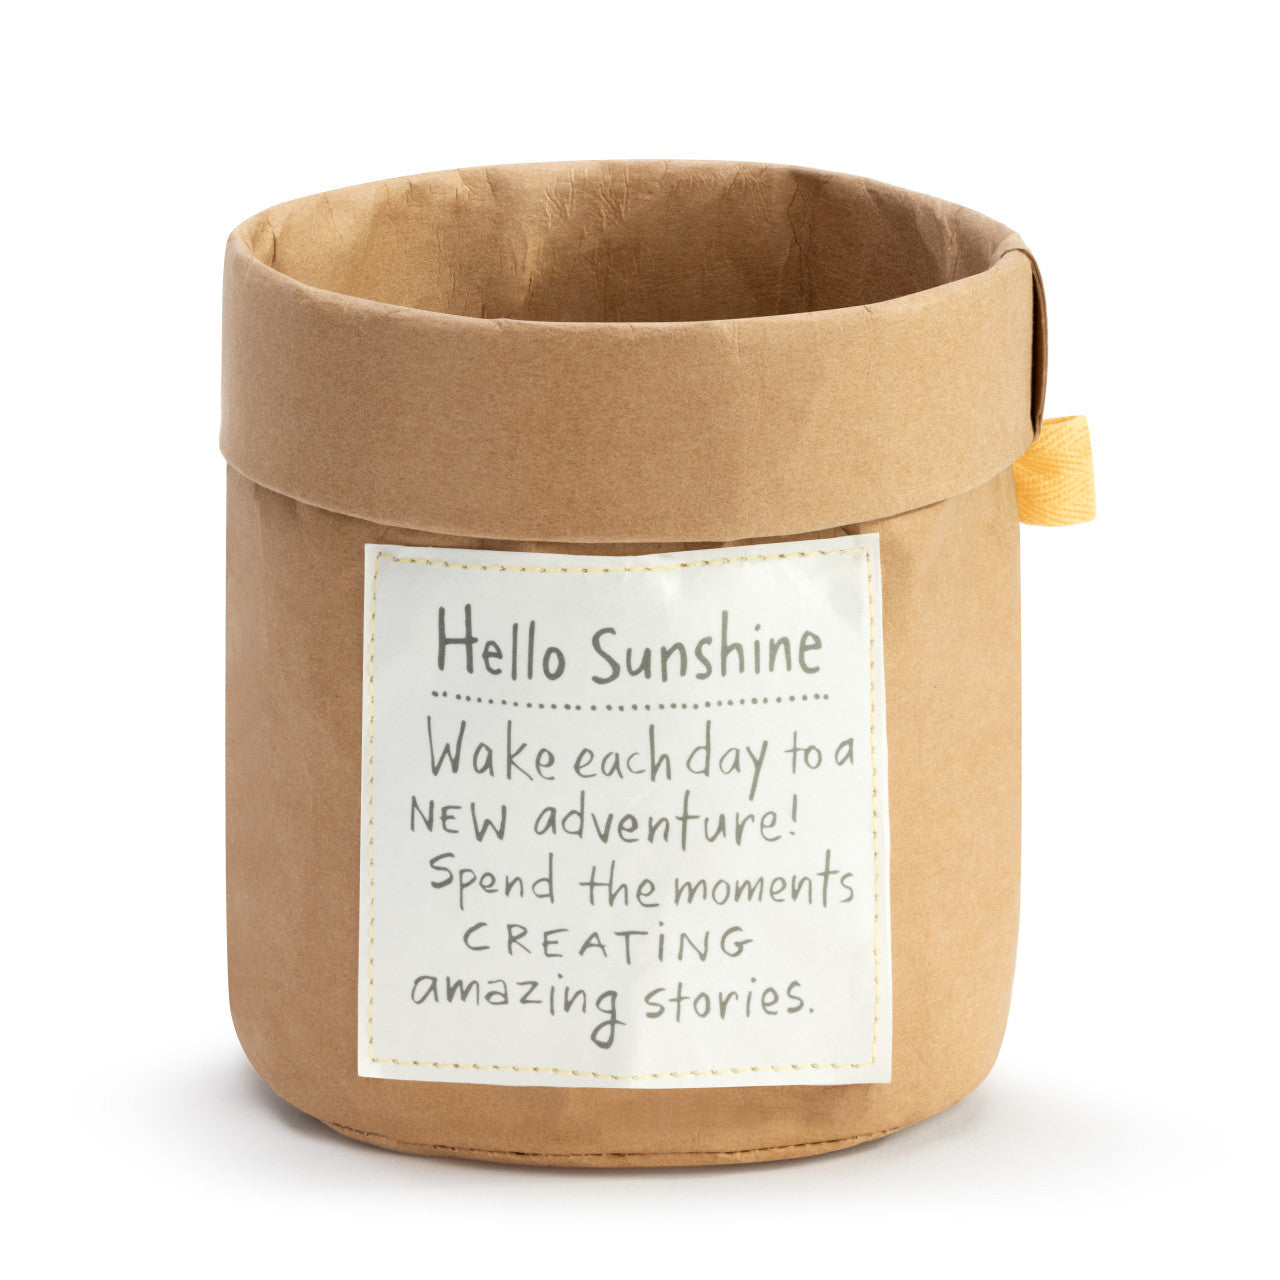 Demdaco Plant Kindness Planter Bag - Sunshine available at The Good Life Boutique